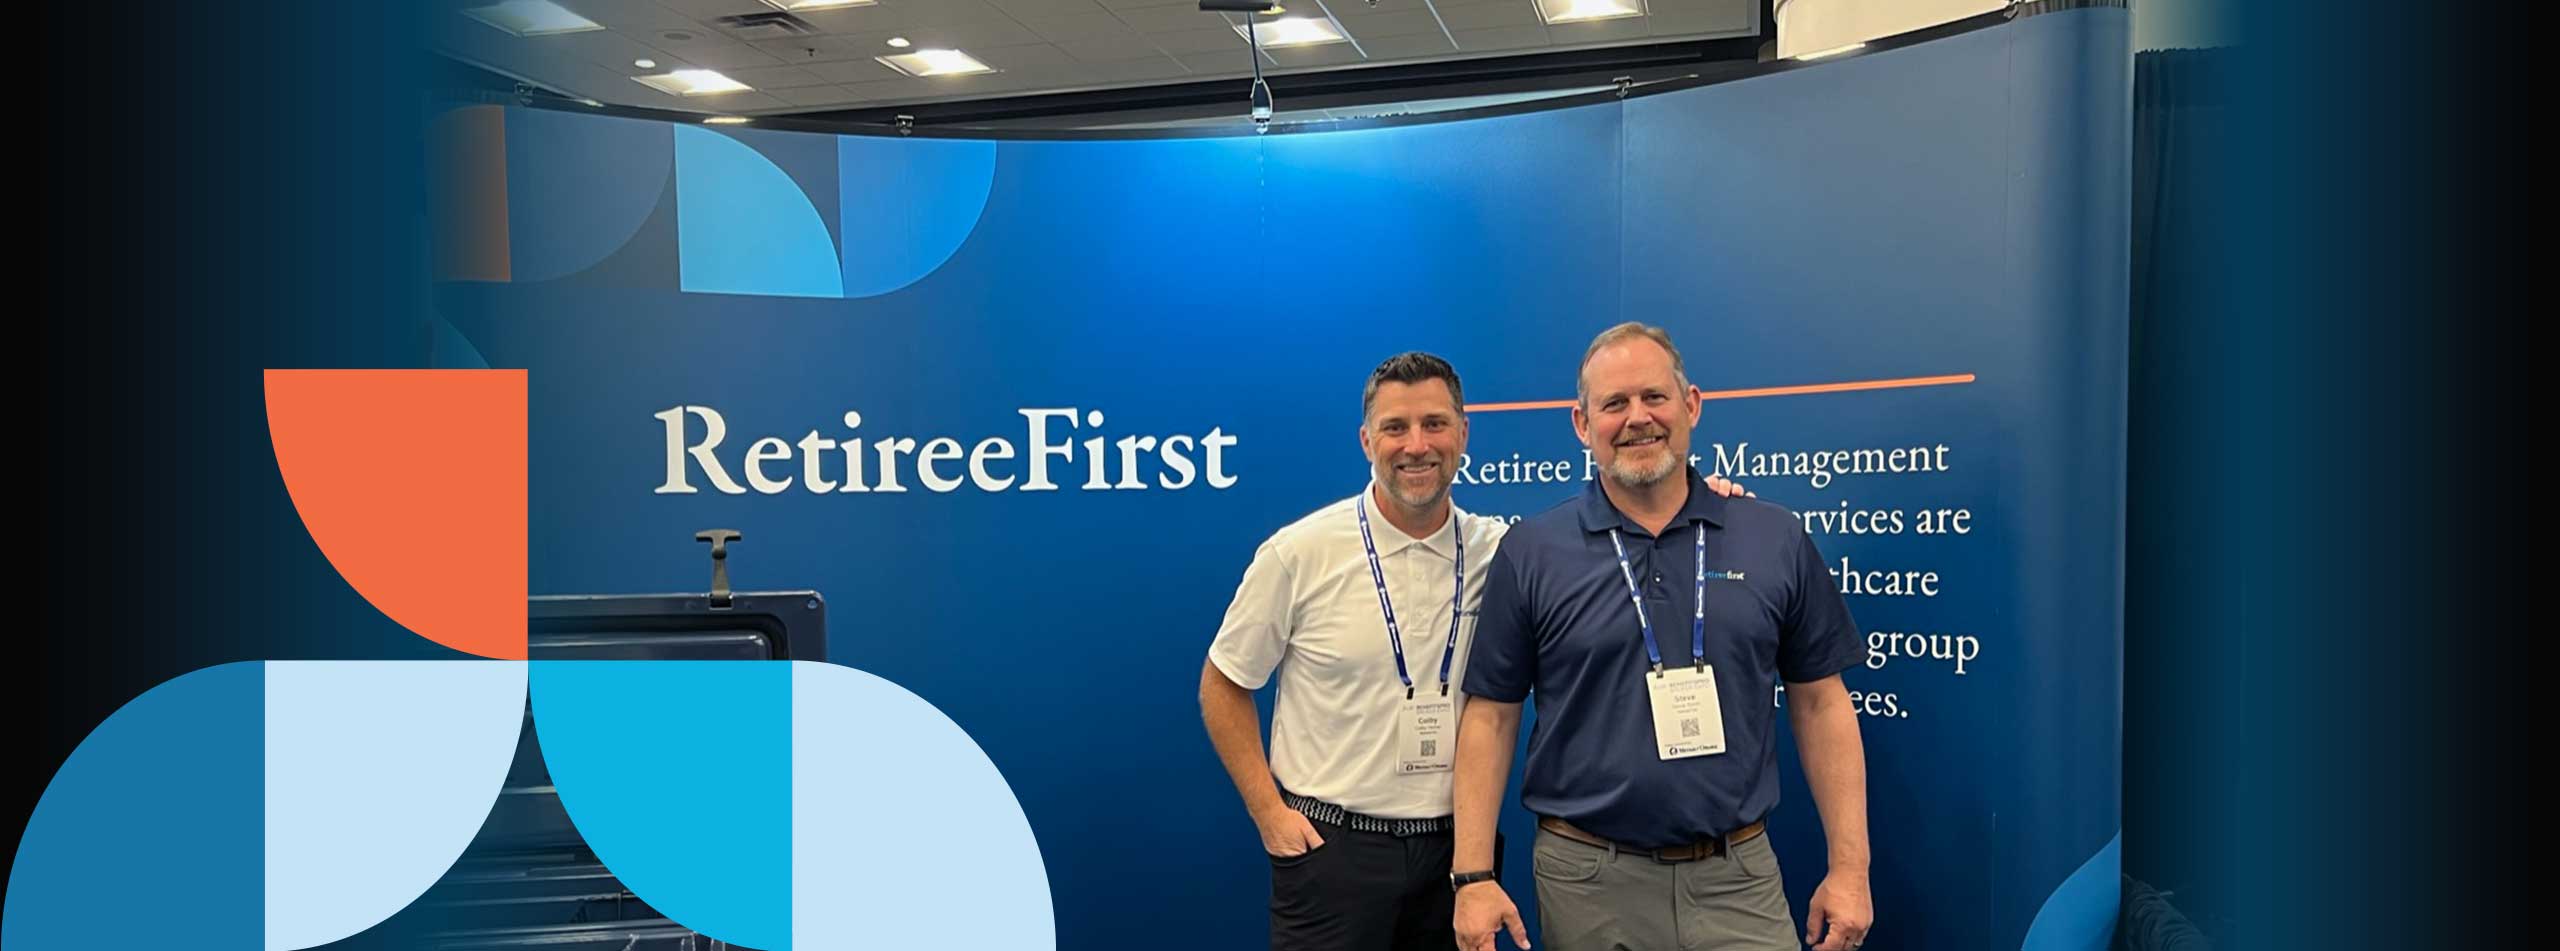 Two employees smiling in front of RetireeFirst banner